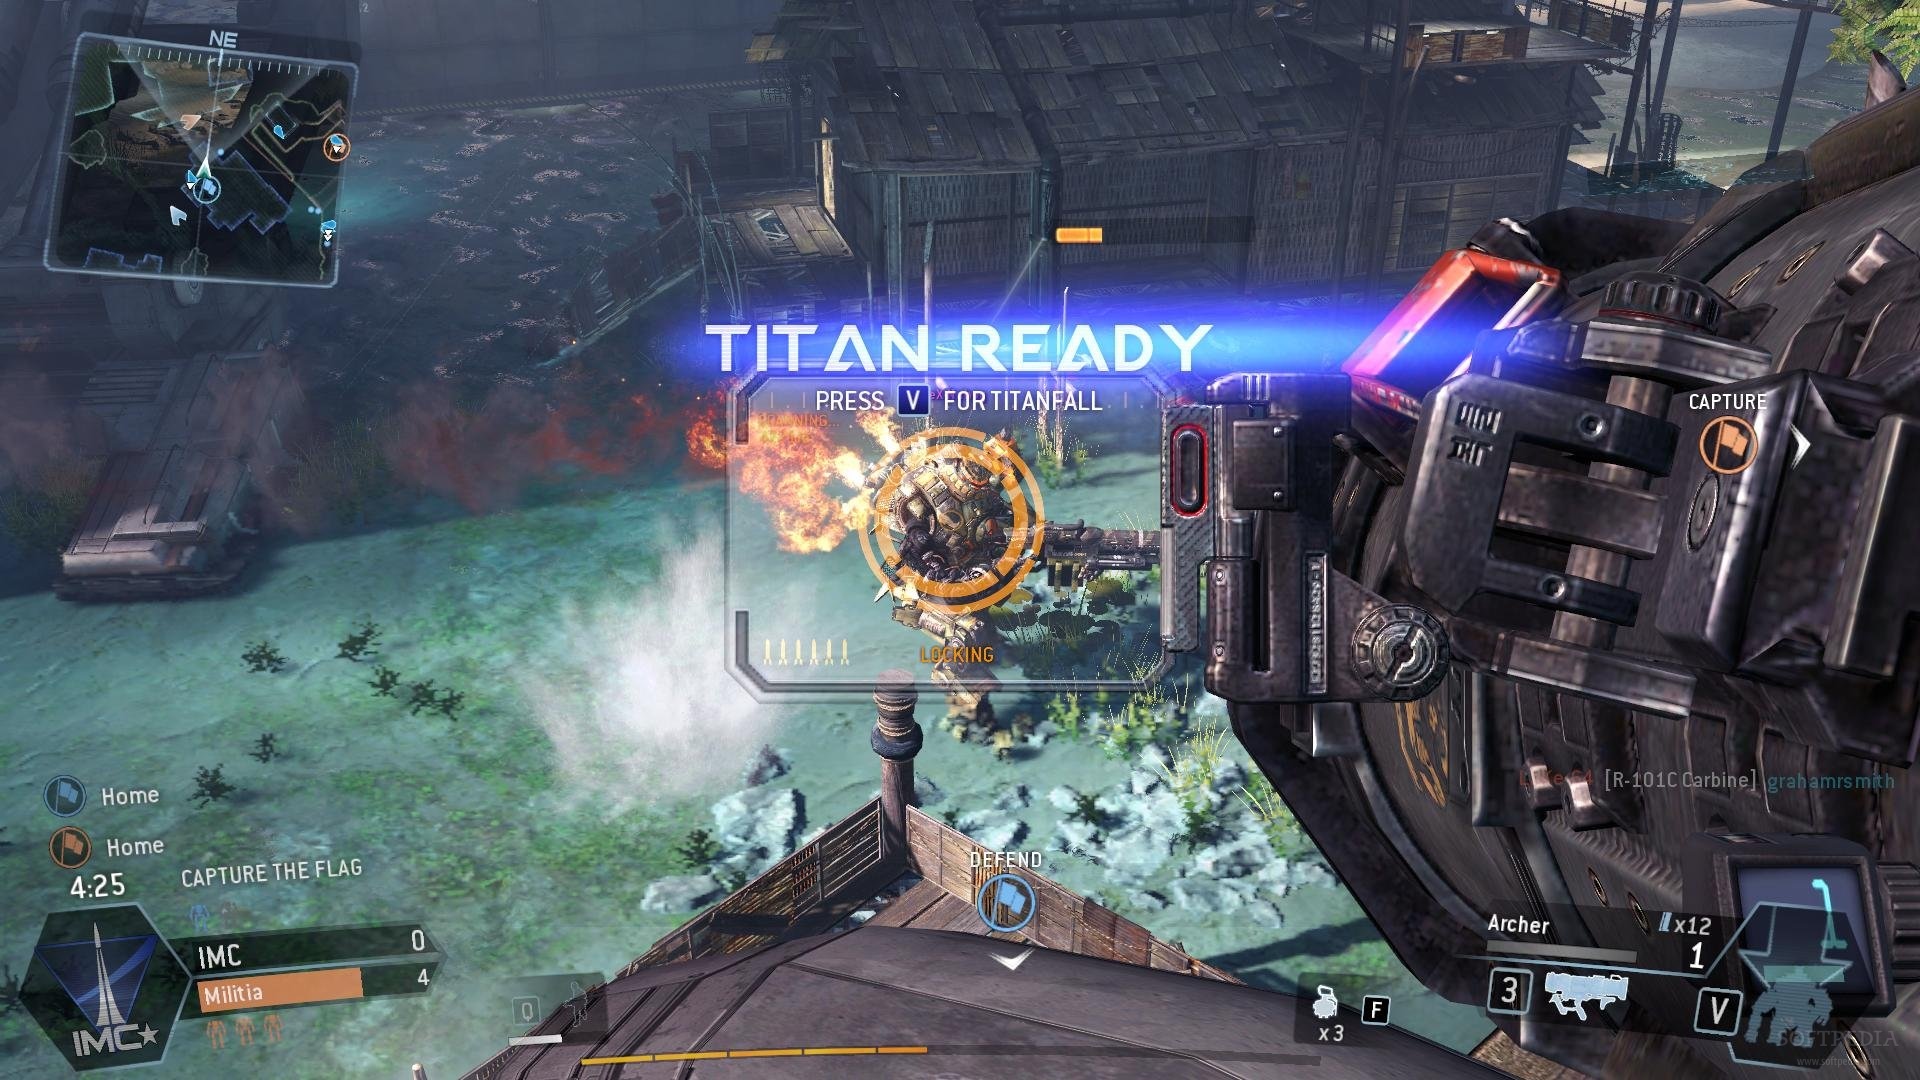 SWEETFX enabled in - TITANFALL - gameplay PC - [running on Windows